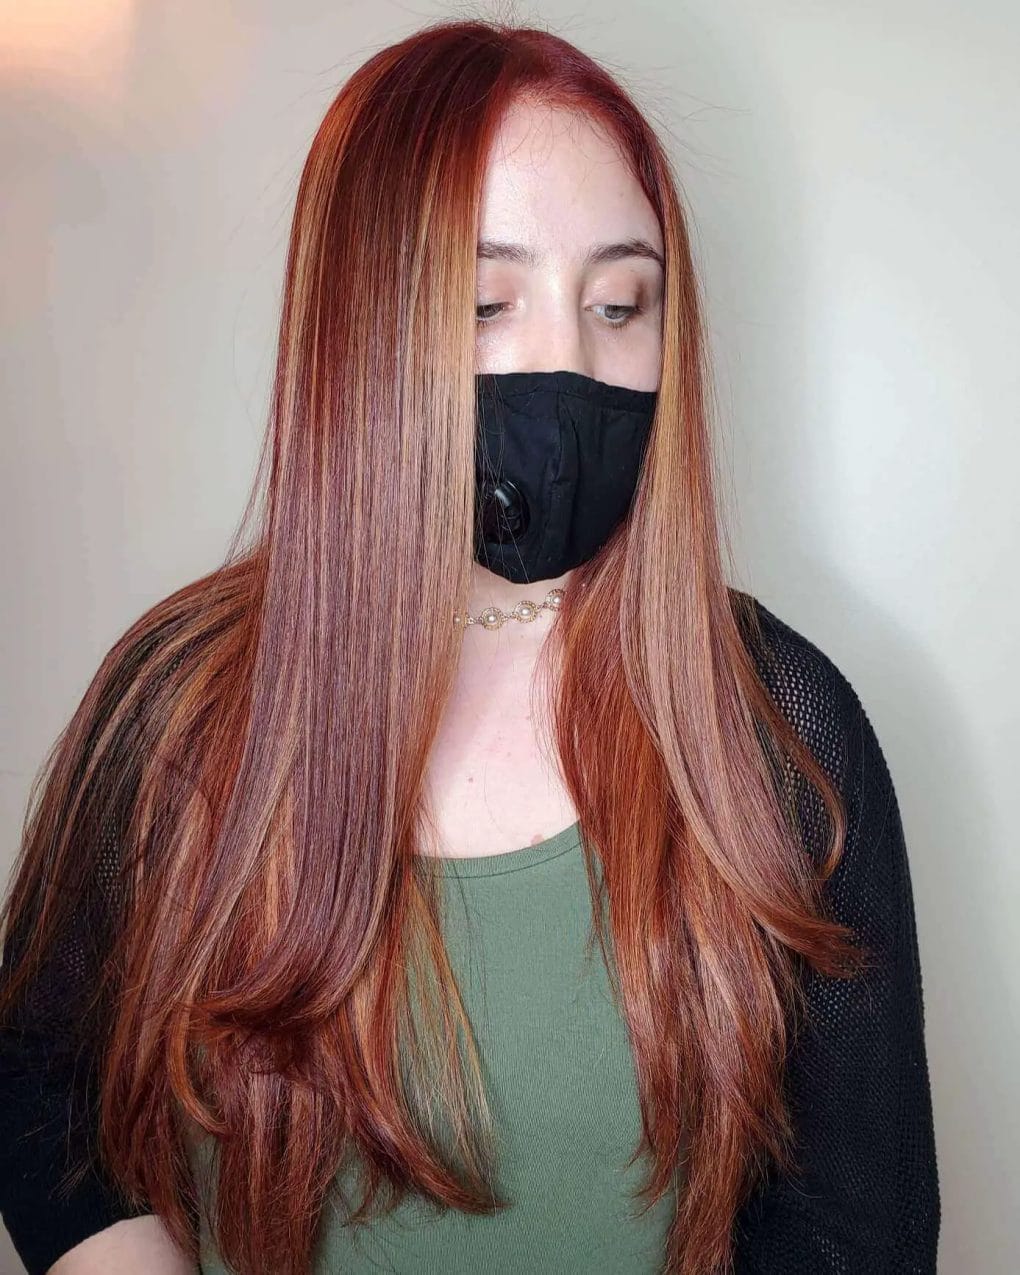 Straight layers with a seamless transition from blonde to red hues.